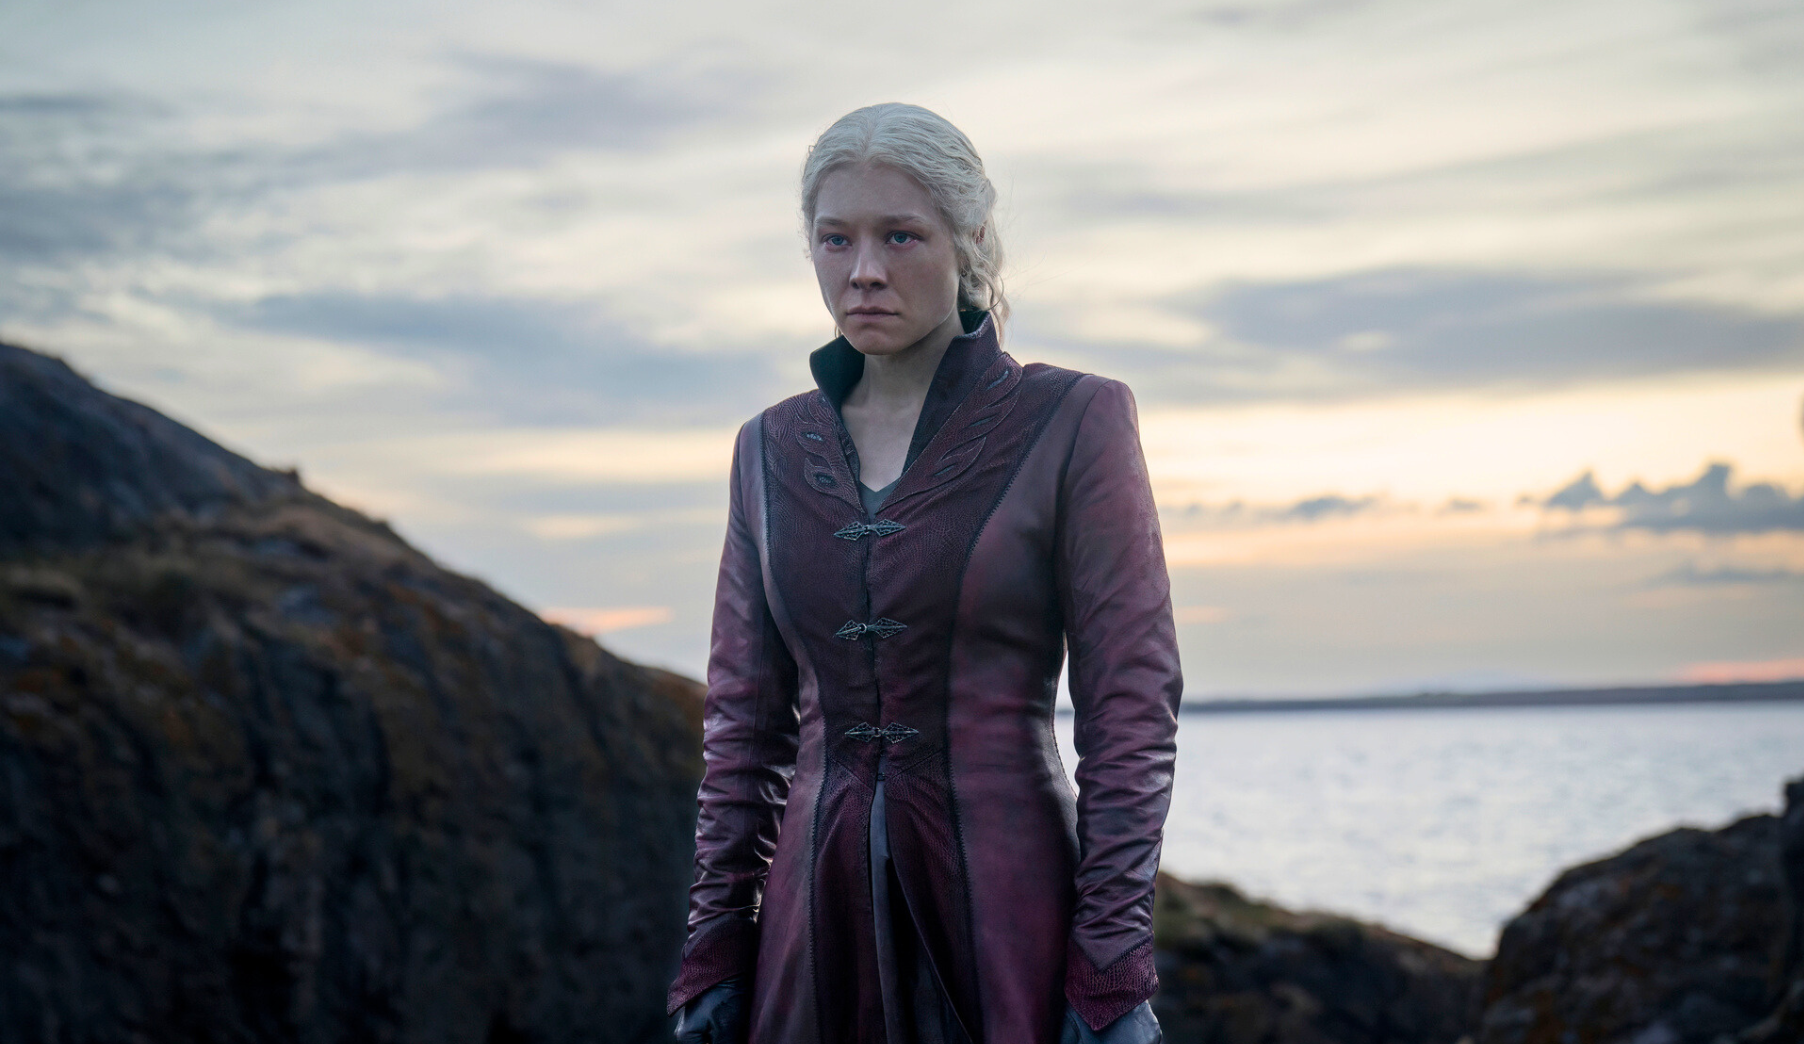 If you loved <em><strong>Game of Thrones</strong></em> and you loved Damsel, then you absolutely have to check out <em>House of the Dragon</em> season 2. It's guaranteed to be the ultimate escape from the summer heat, and will have just as much intrigue as the first season. <em>House of the Dragon season 2 drops on Max this June. The show stars Olivia Cooke, Emma D’Arcy, Matt Smith, Eve Best, Steve Toussaint, Fabien Frankel, Ewan Mitchell, Sonoya Mizuno, Harry Collett, Rhys Ifans, Bethany Antonia, Tom Glynn-Carney, Phoebe Campbell, Phia Saban, Jefferson Hall, and Matthew Needham.</em>